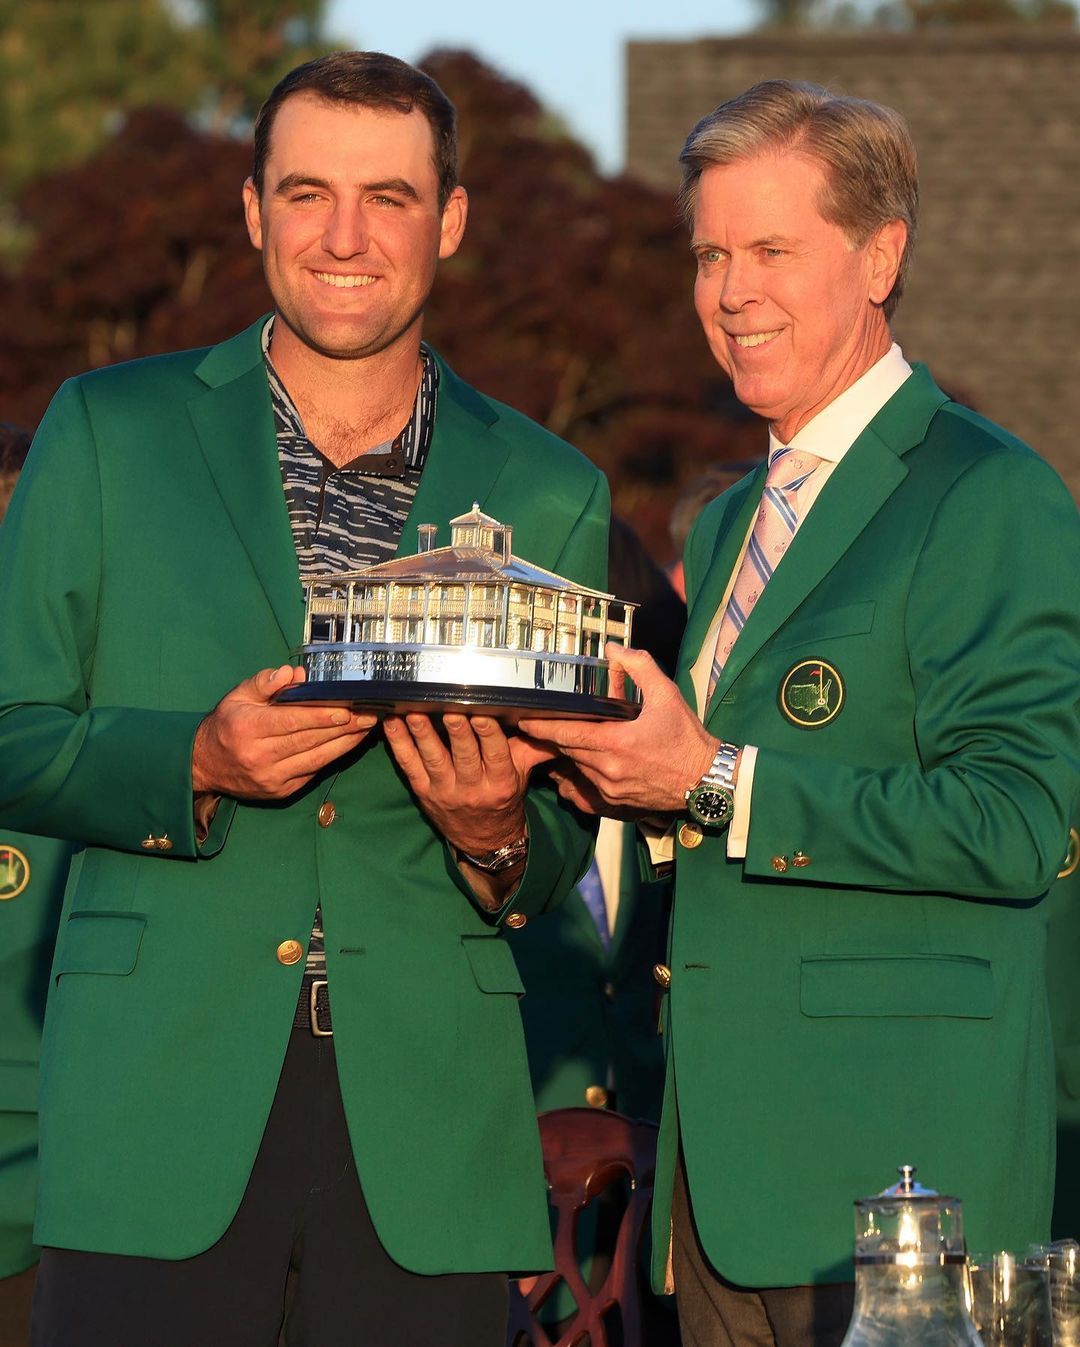 Masters prize money: How much will players earn at 2023 tournament?